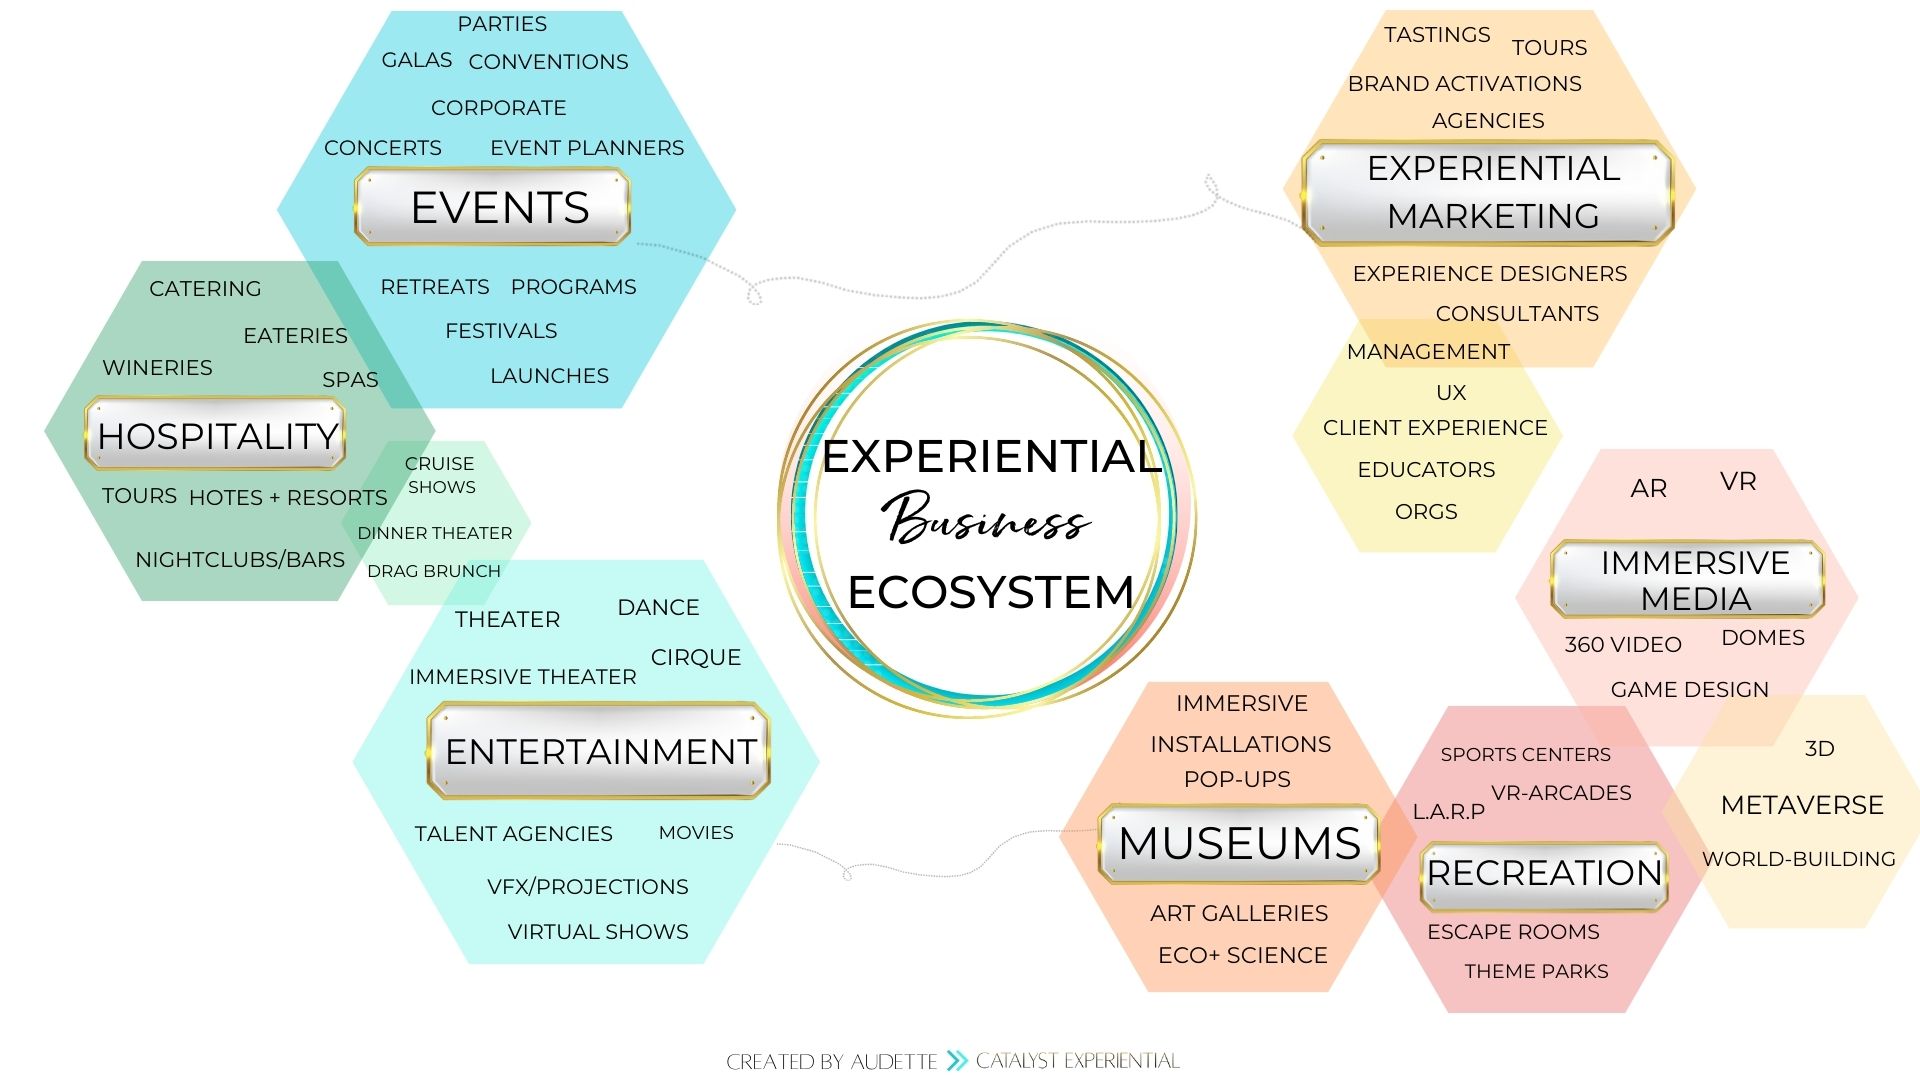 Experiential Business Ecosystem Map by Audette